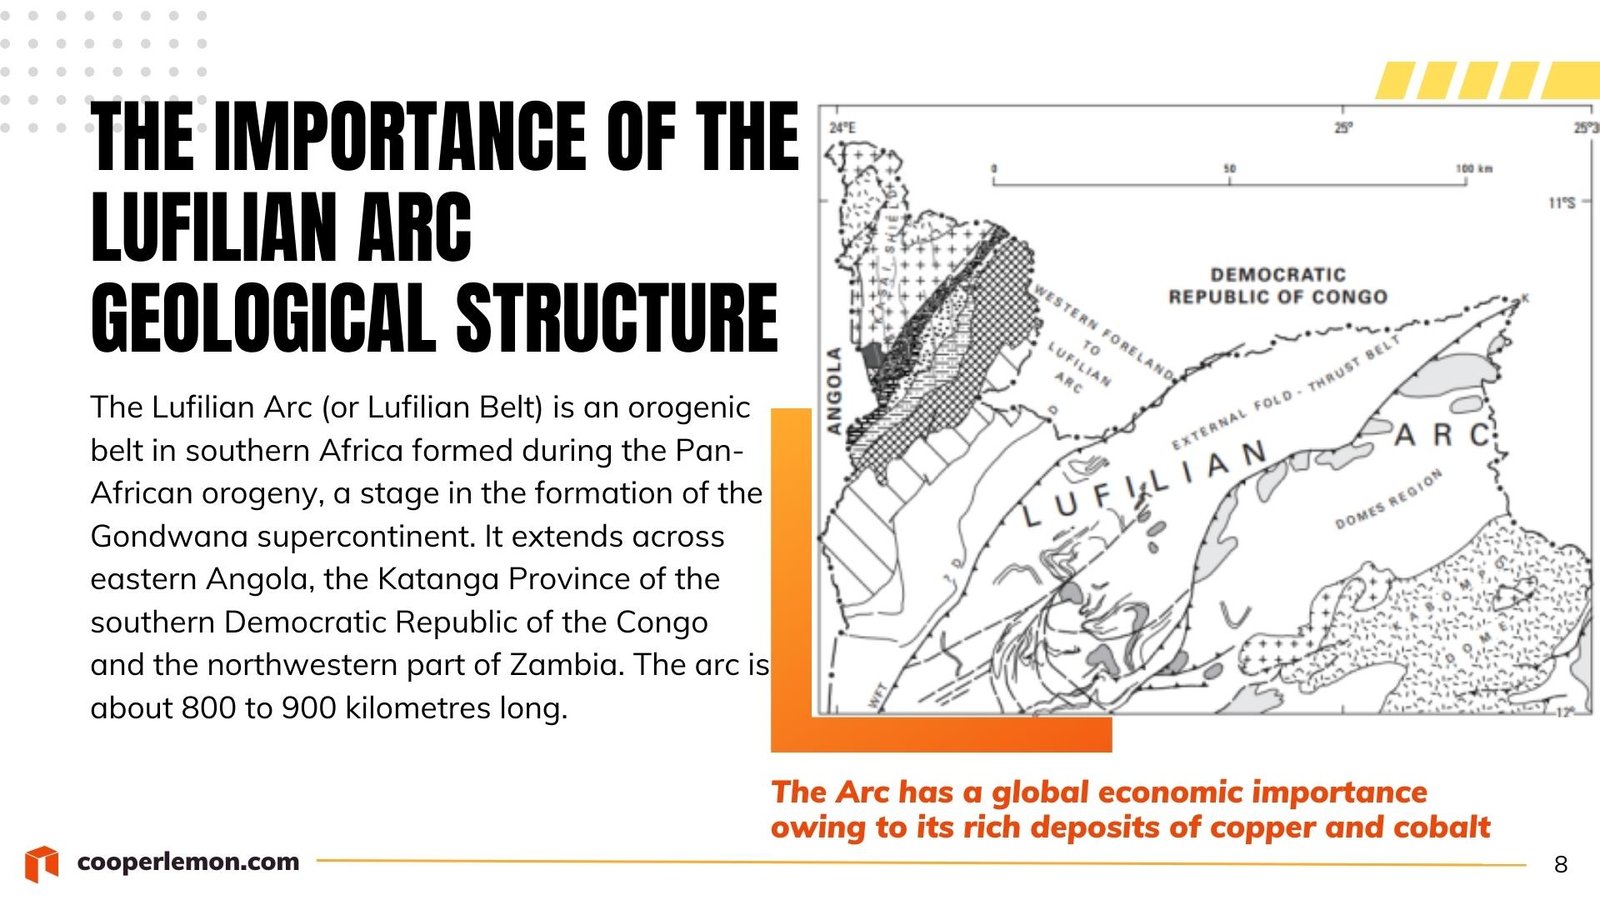 The Importance of the Lufilian Arc Geological Structure